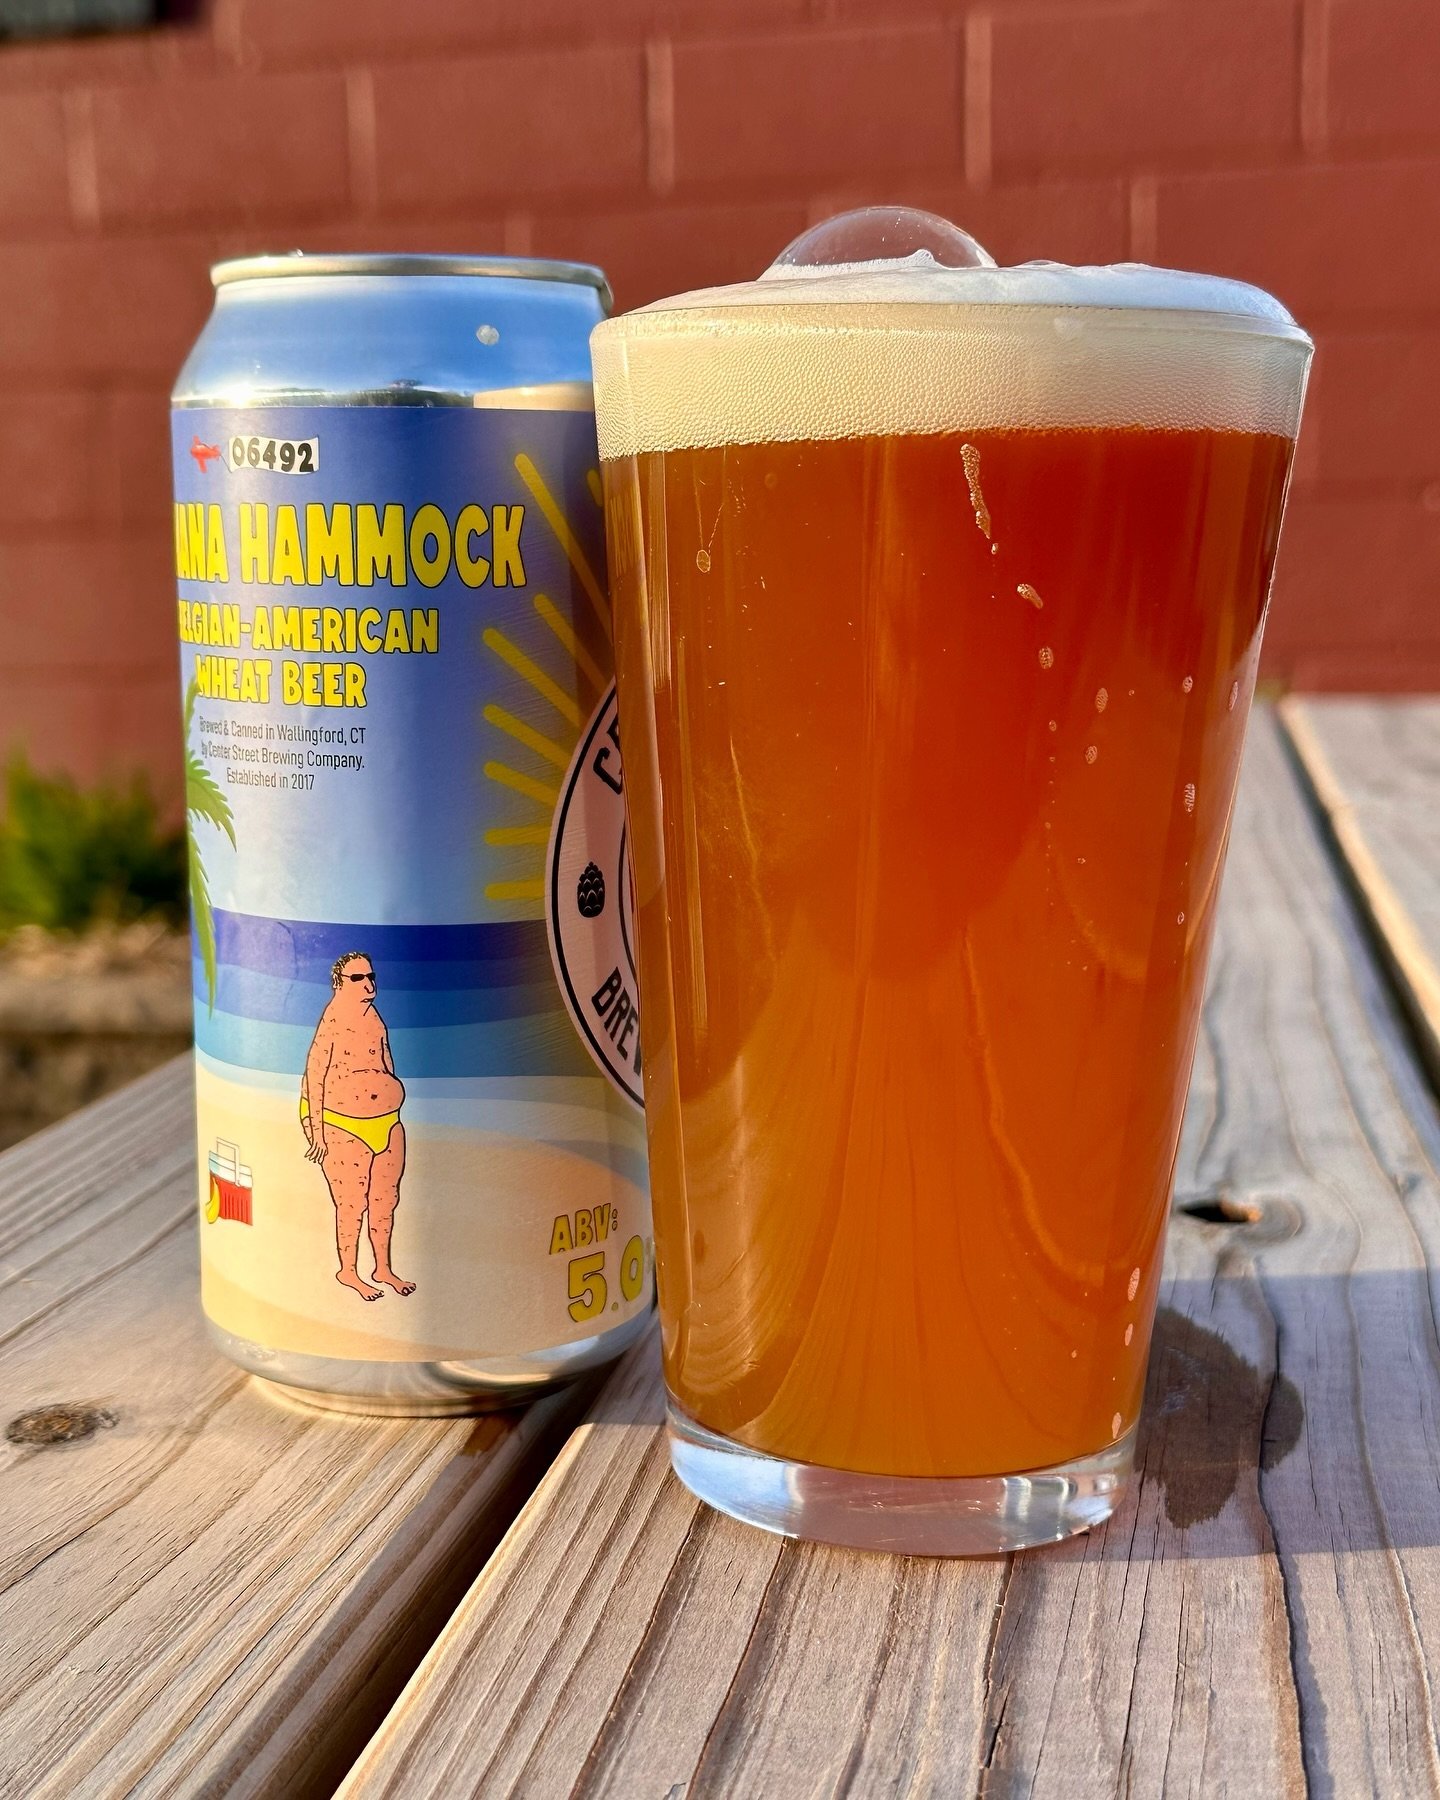 Banana Hammock releases tomorrow!! Full of flavor and refreshing, this Belgian Wheat Beer is a tasty Spring time beer! Available on tap and in cans starting tomorrow! 

#beer #brewery